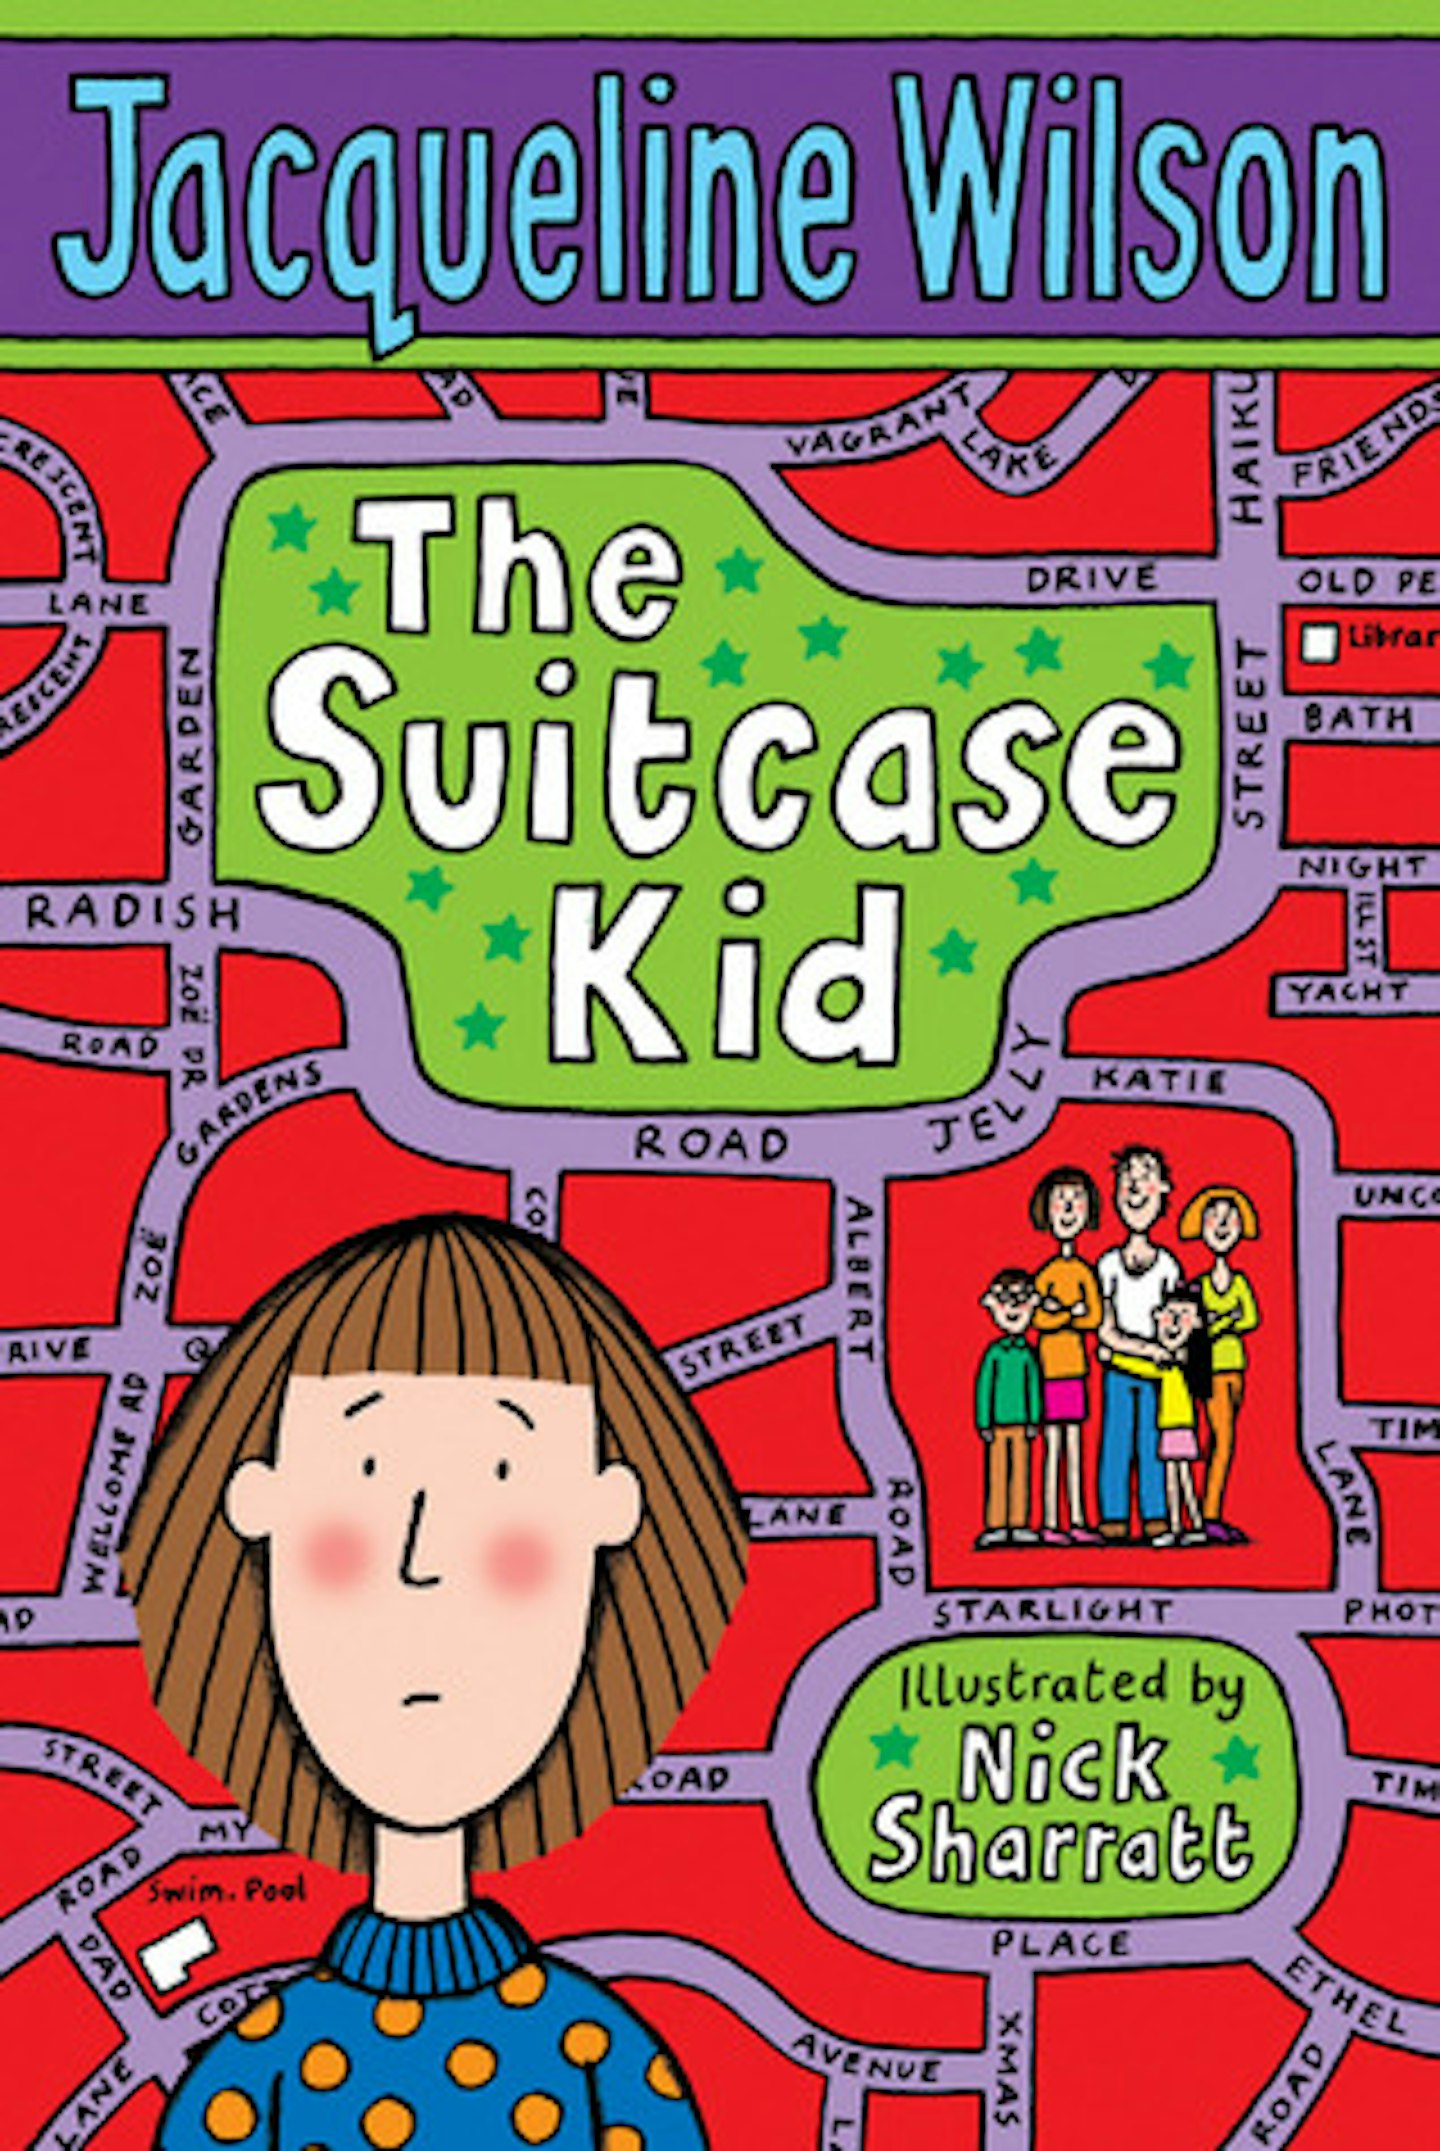 10. The Suitcase Kid